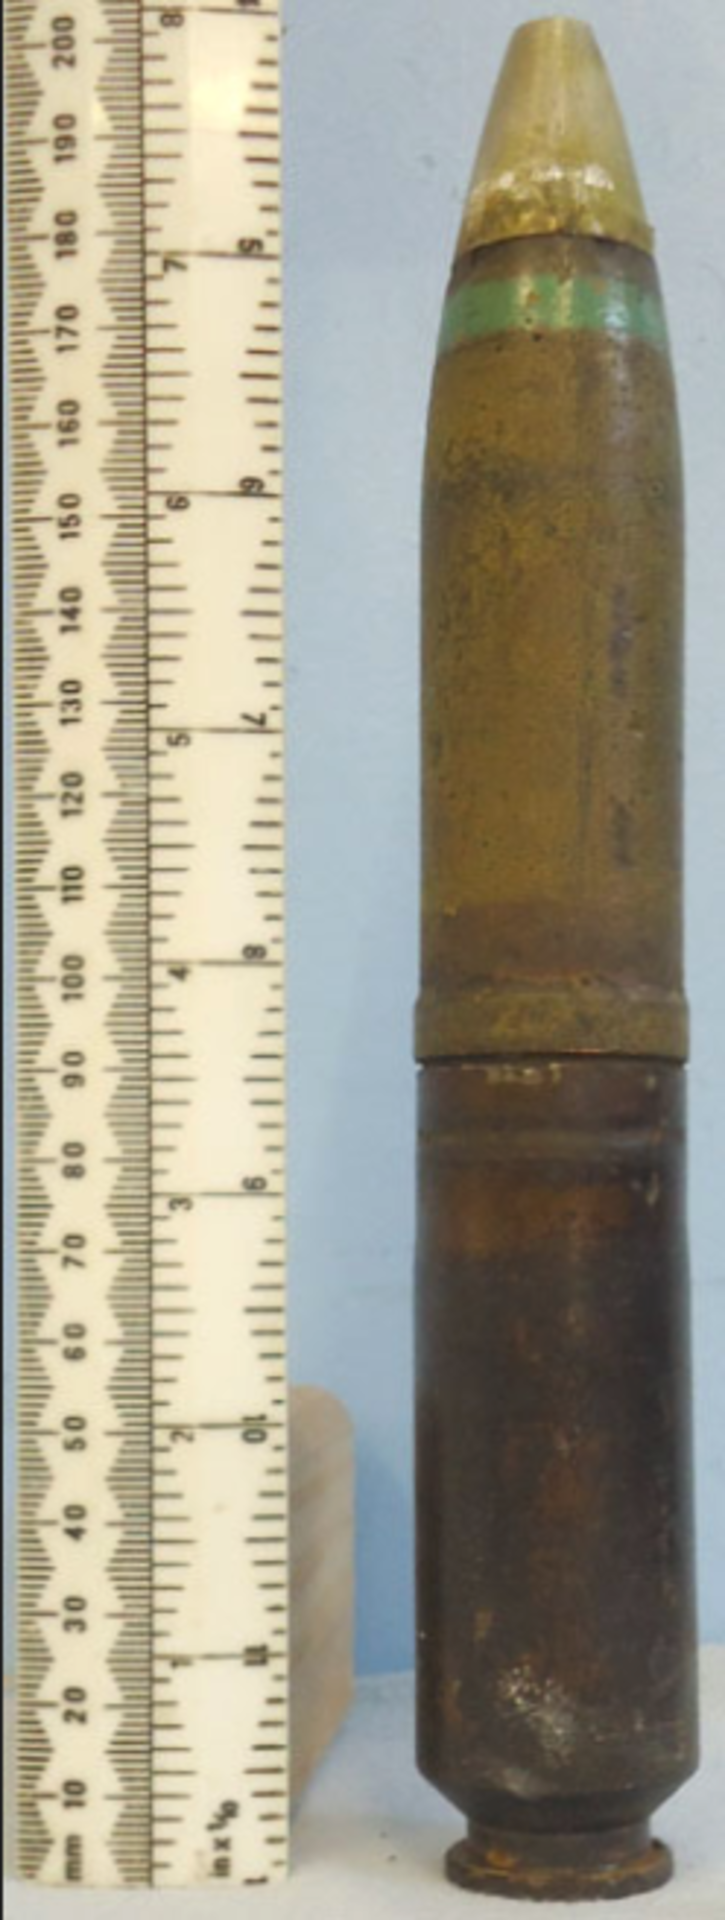 INERT DEACTIVATED. WW2 INERT German 30mm MK108(30x90RB)HEI (High Explosive Incendiary) Cannon Round. - Image 2 of 3